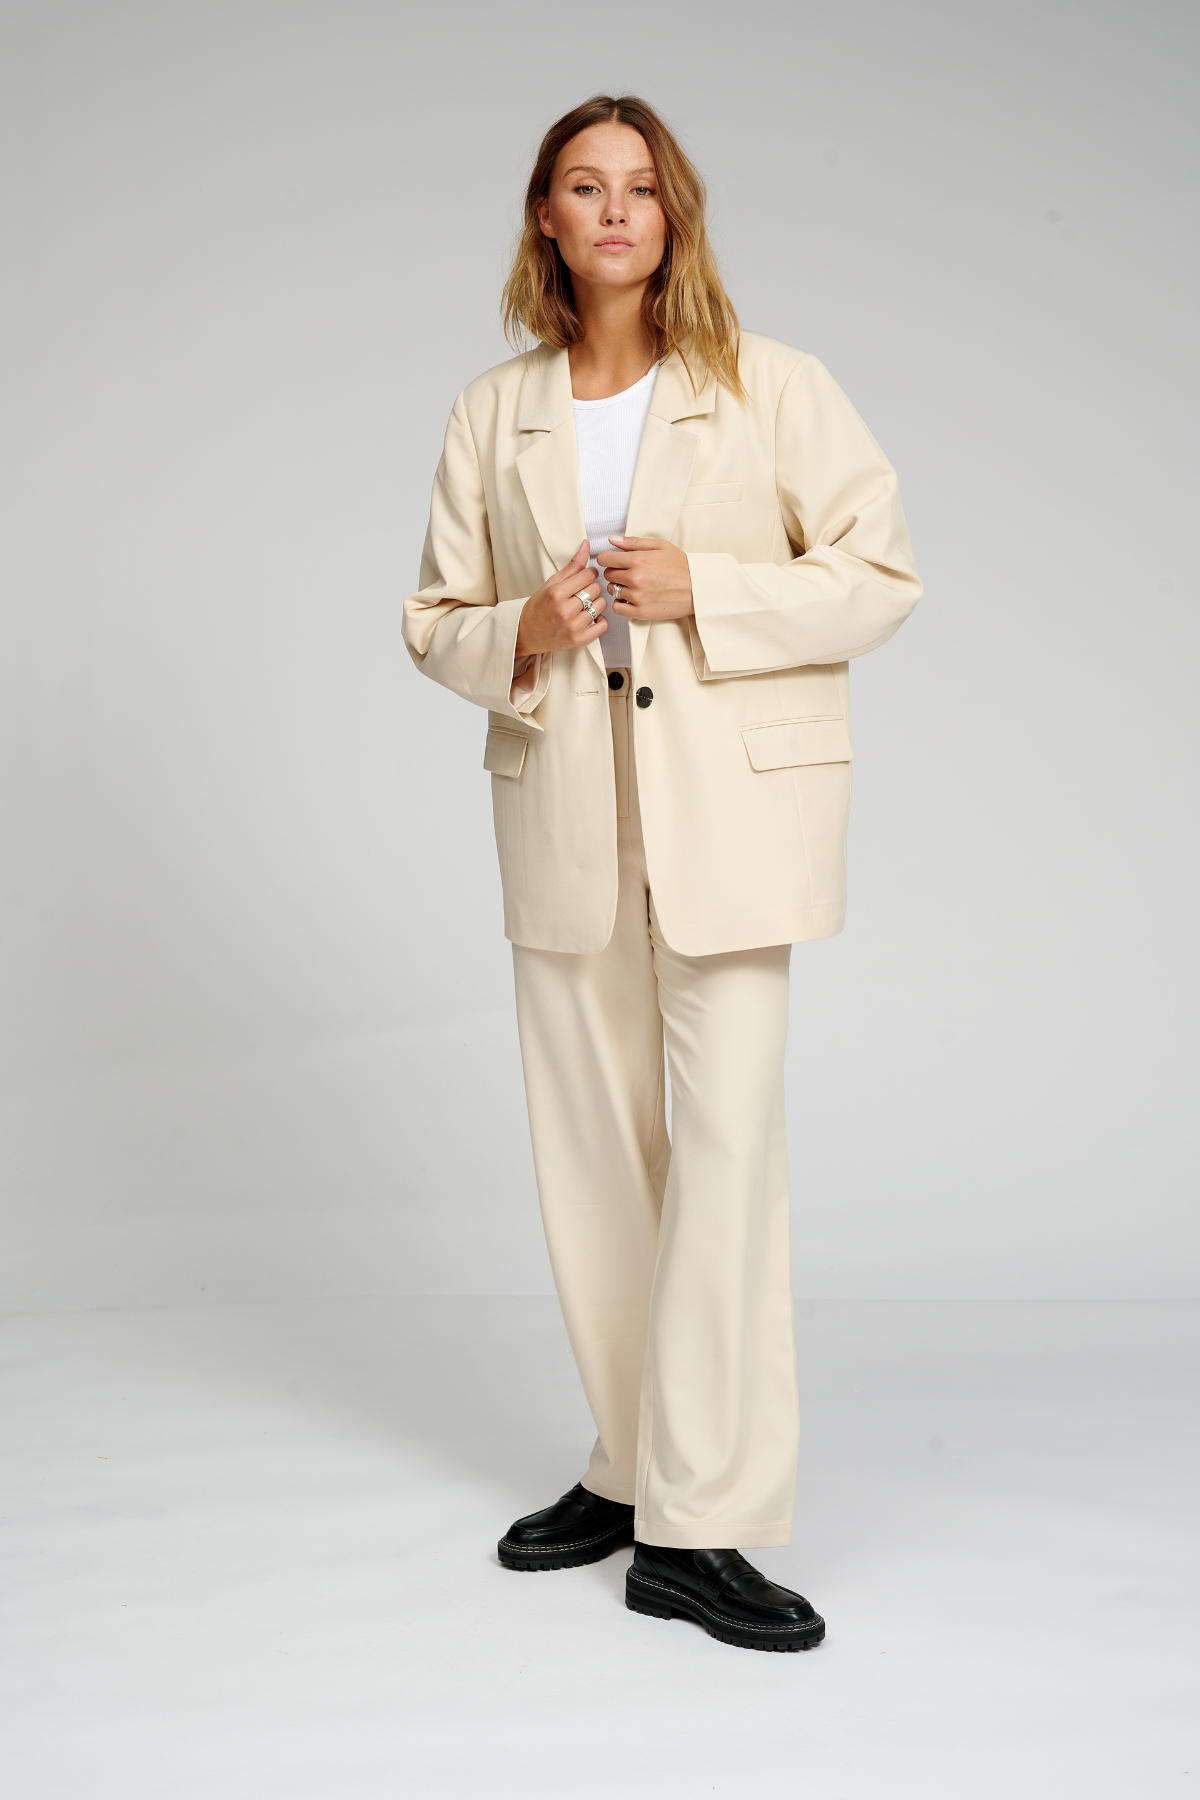 Oversized Blazer with Classic Suit Trousers - Package Deal (Beige)